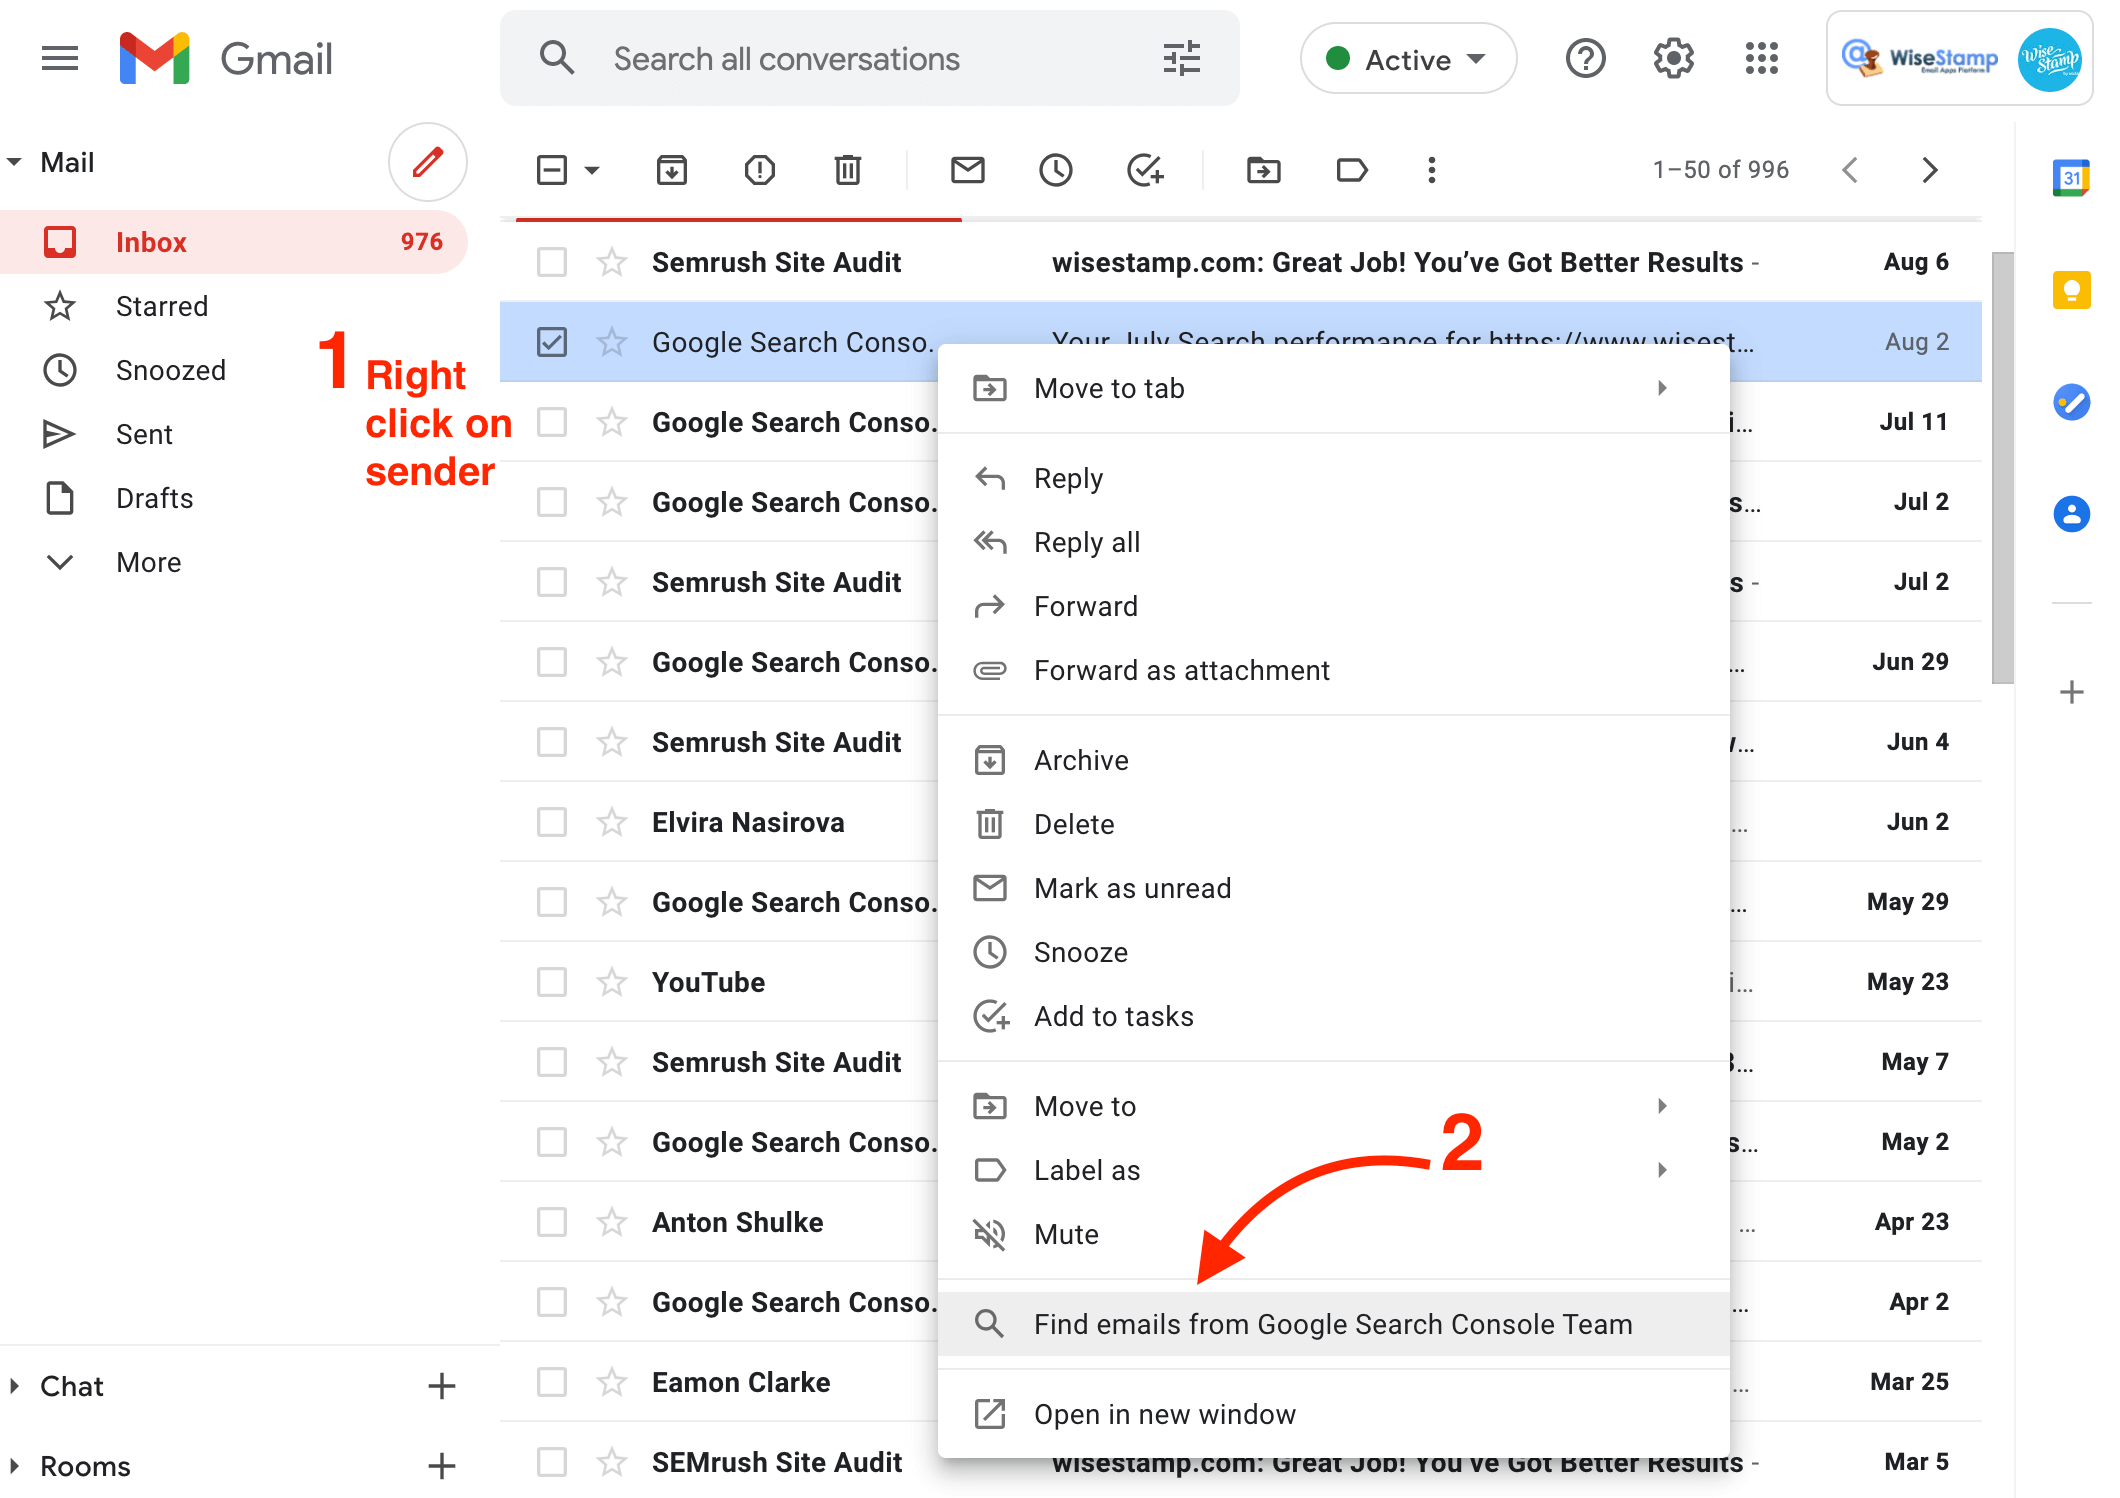 Gmail sort inbox by from (sort Gmail by sender) - option 1